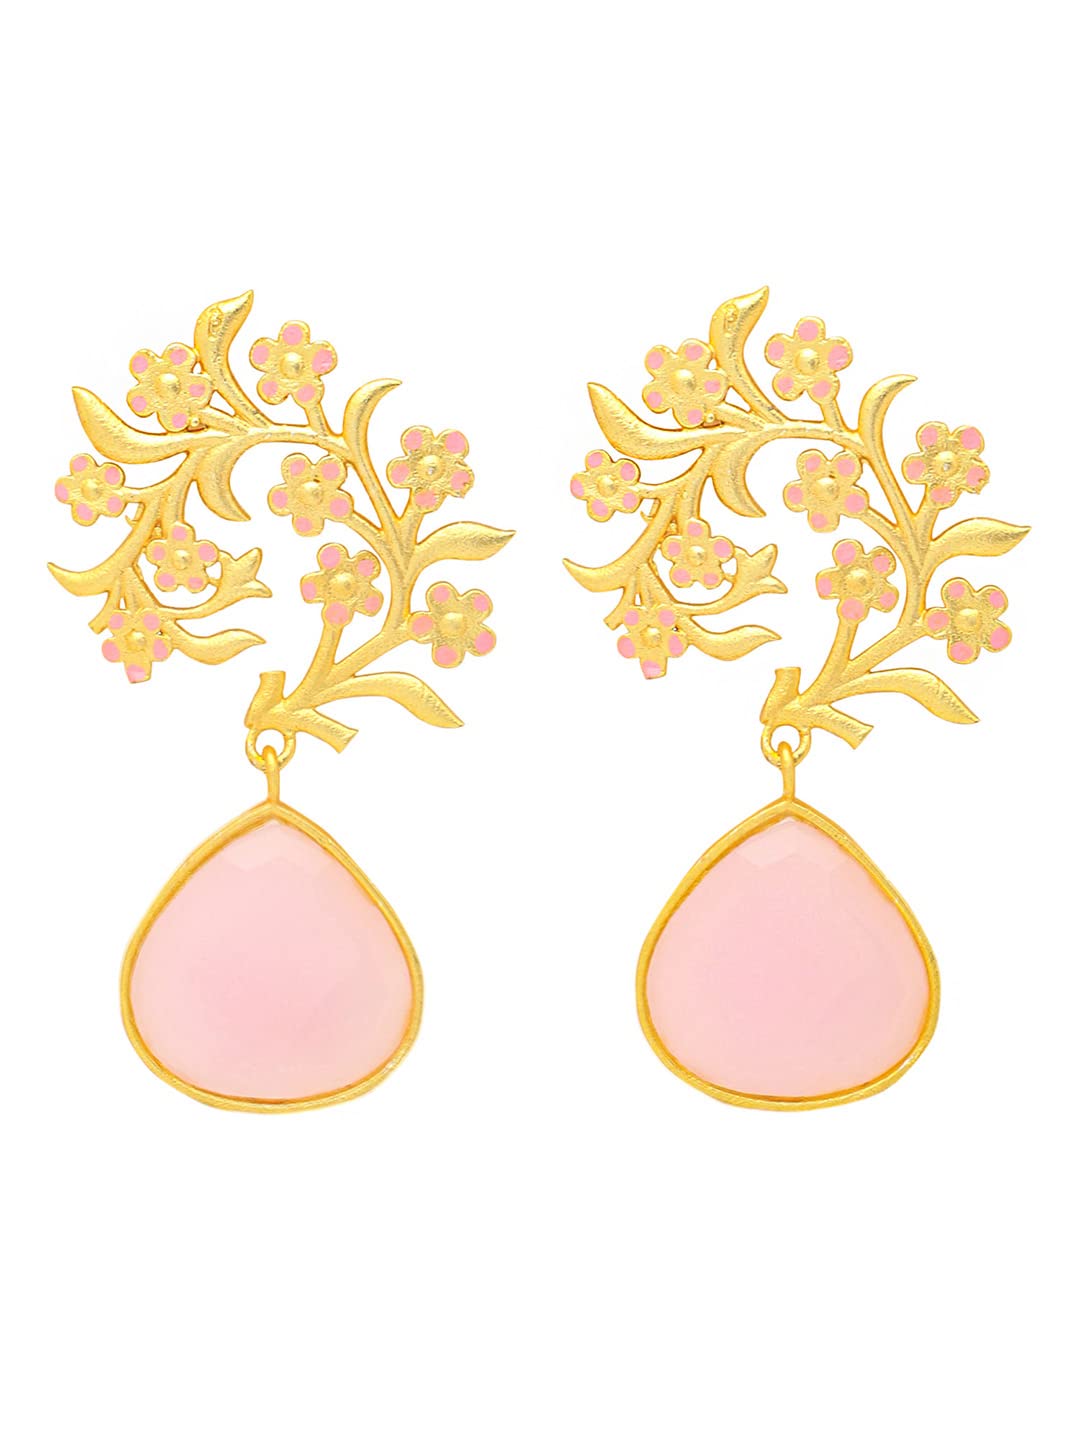 Yellow Chimes Drop Earrings for Women Traditional Gold Plated Studded Pink Stone Ethnic Floral Shaped Drop Earrings for Women and Girls